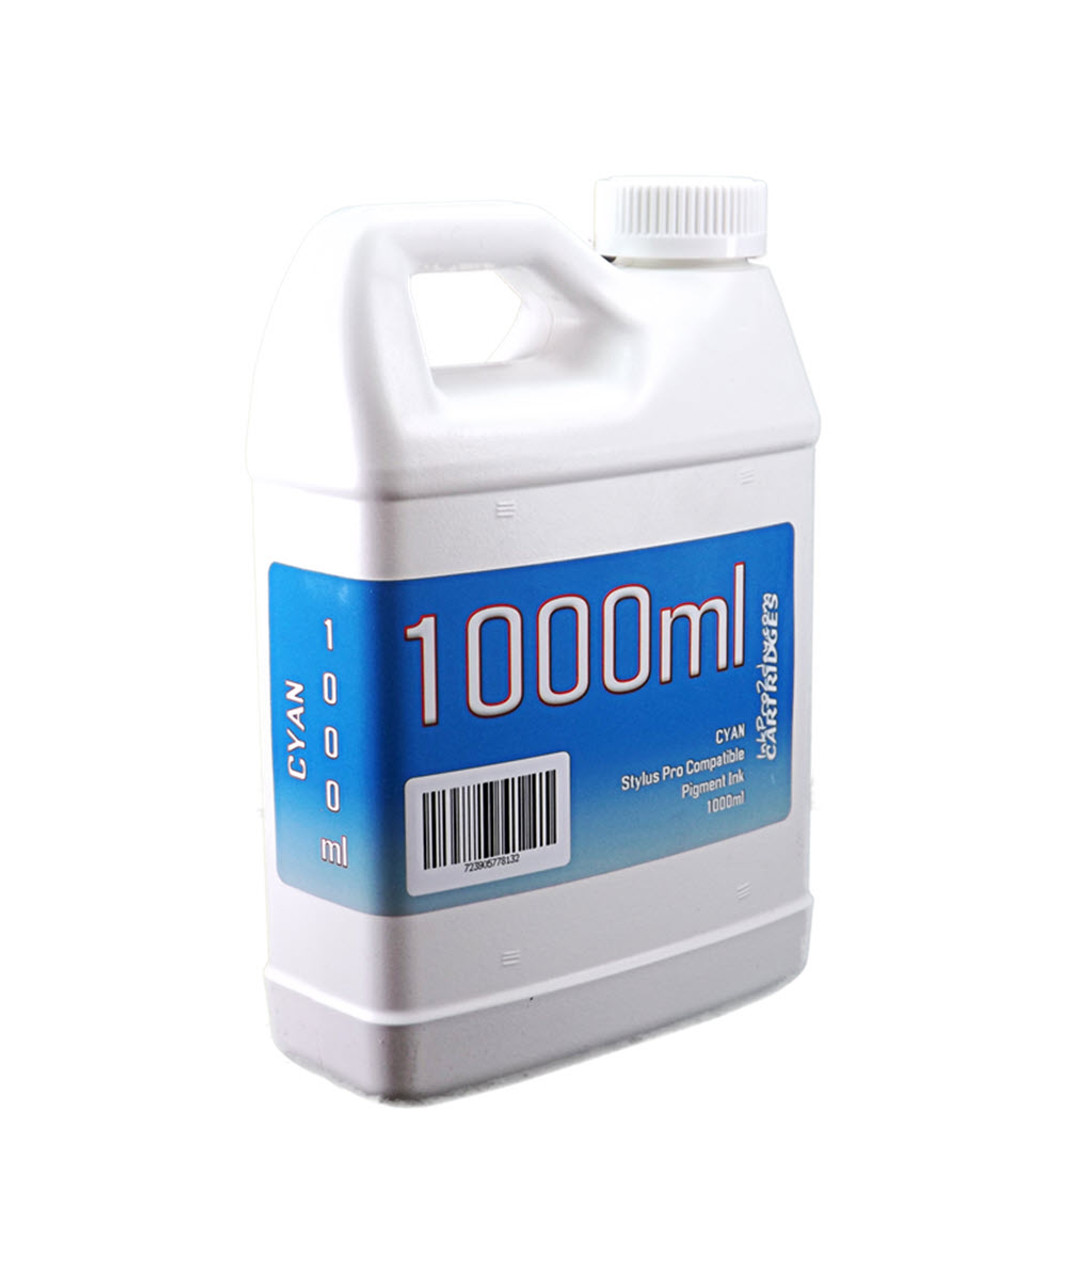 Cyan 1000ml Bottle Compatible UltraChrome K3 Pigment Ink for Epson Stylus Pro 4880 Printers
